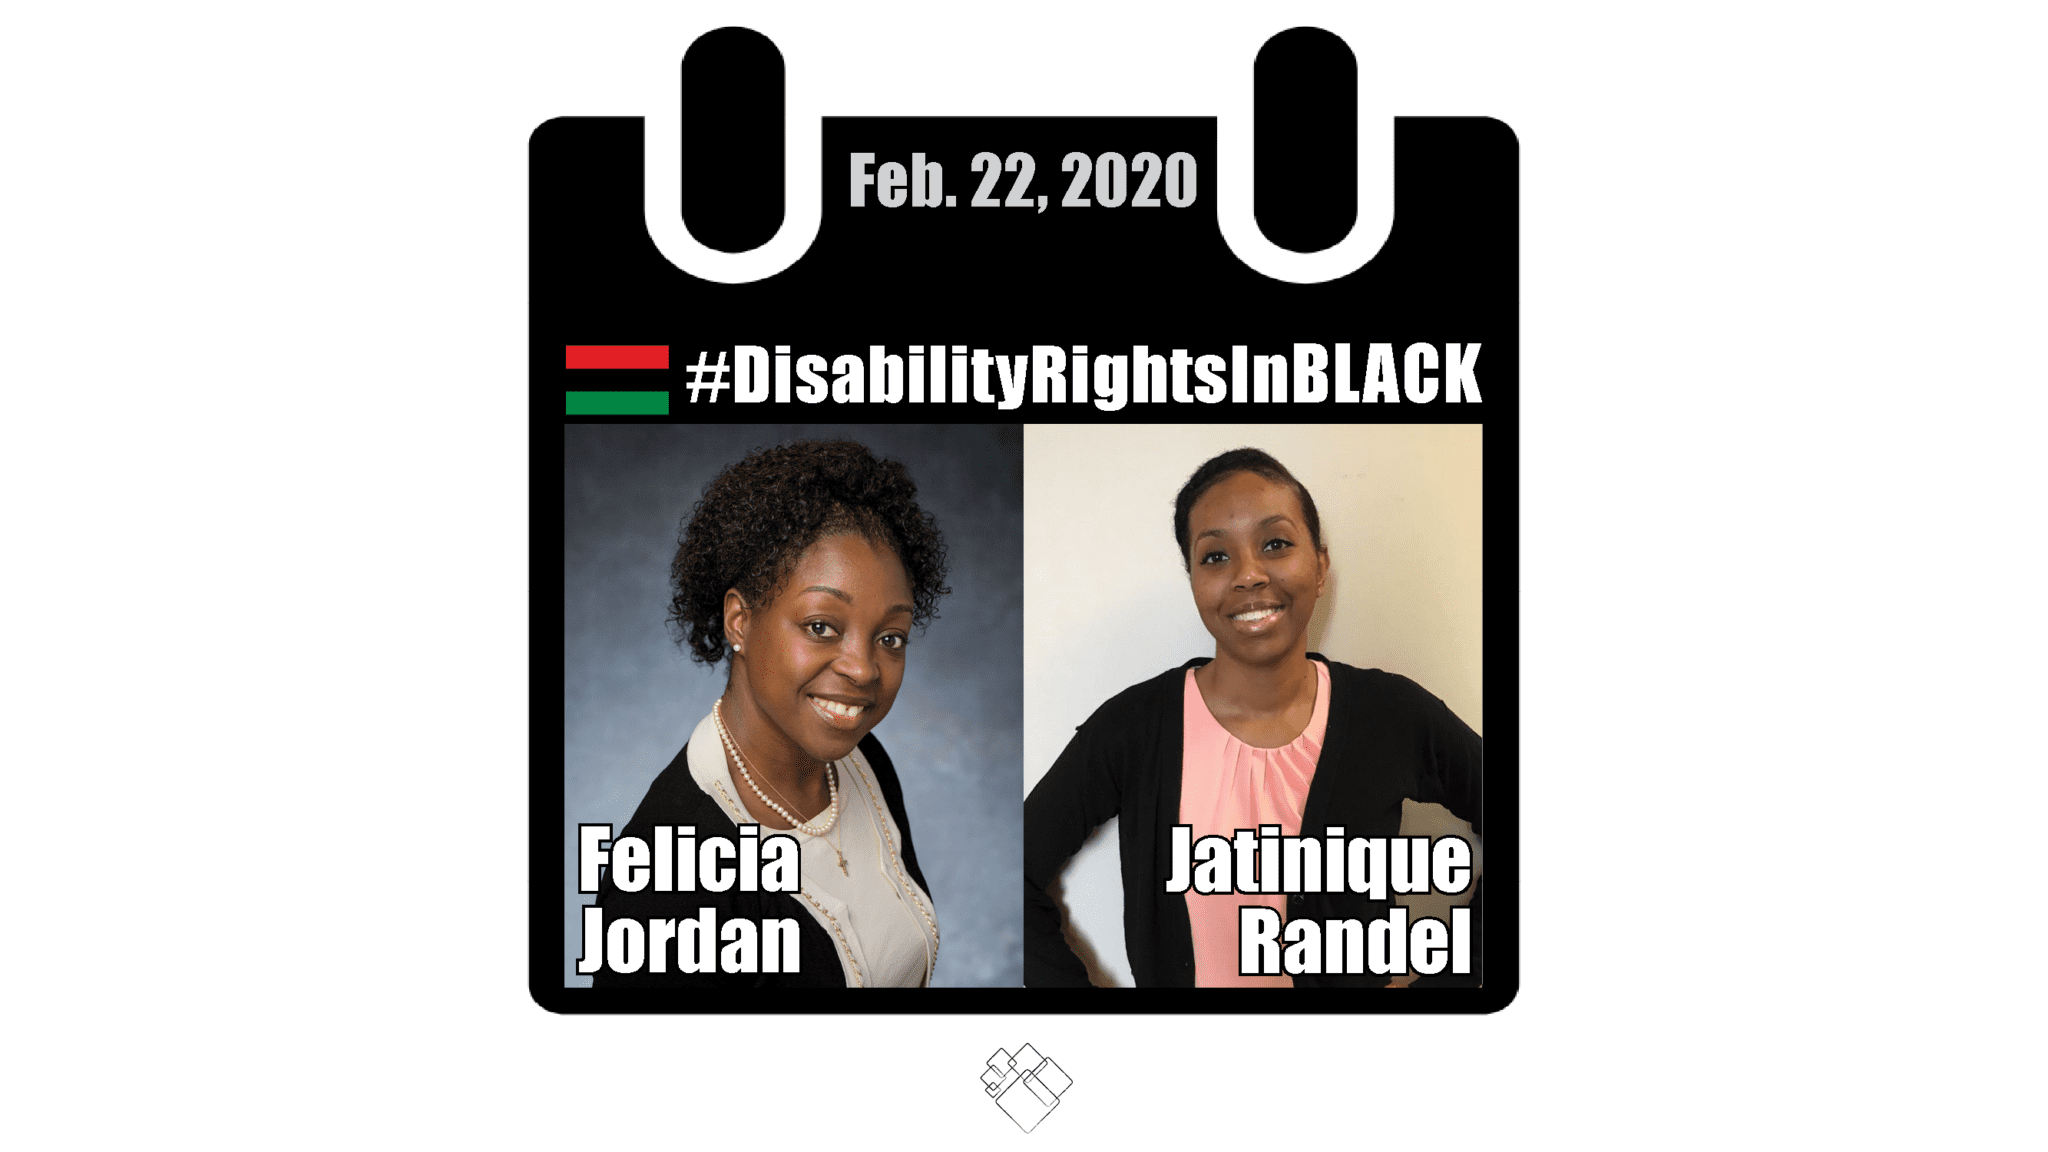 Side by side photos of Felicia Jordan and Jatinique Randle with the Disability Rights in Black calendar style frame graphic with the hashtag for the series at the top and the date, February 22, 2020. Both women smile at the camera, Felicia wears cream colored shirt with a black cardigan and pearls, Jatinique has her hands on her hips and wears a peach colored shirt on with a black cardigan.